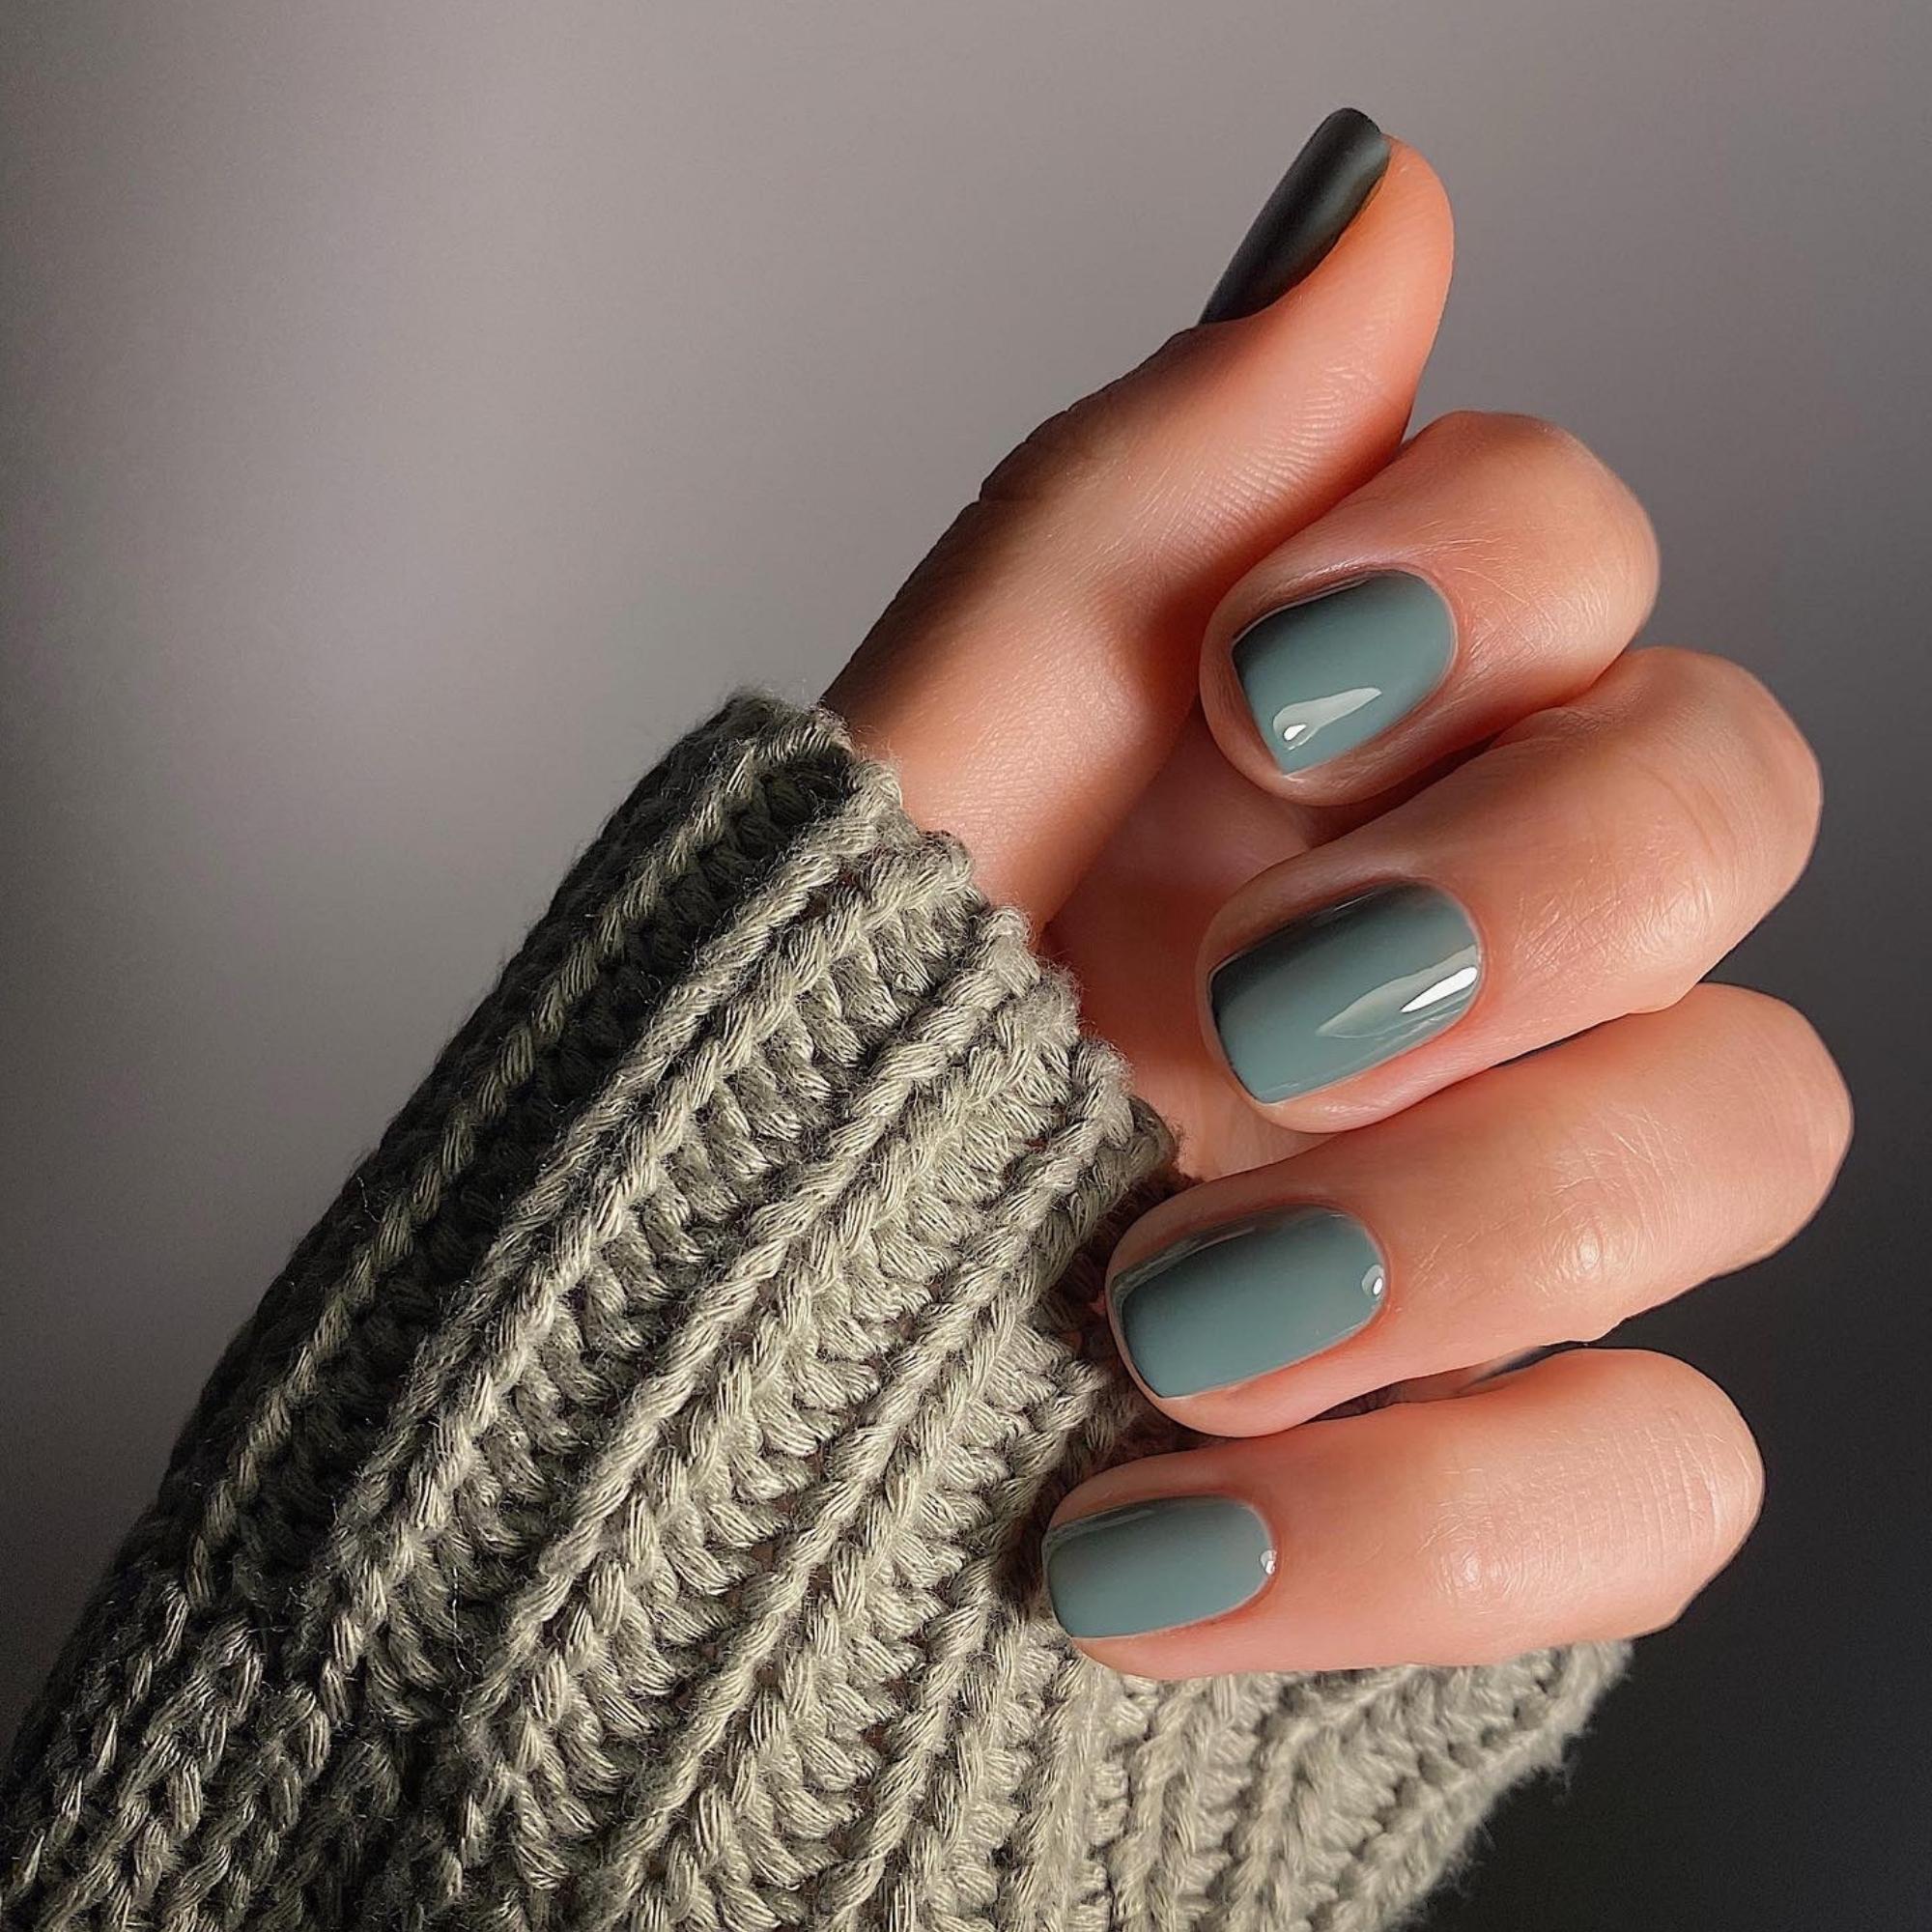 Freshly manicured nails in moss green polish from A Weathered Penny, modelled with a knit jumper sleeve